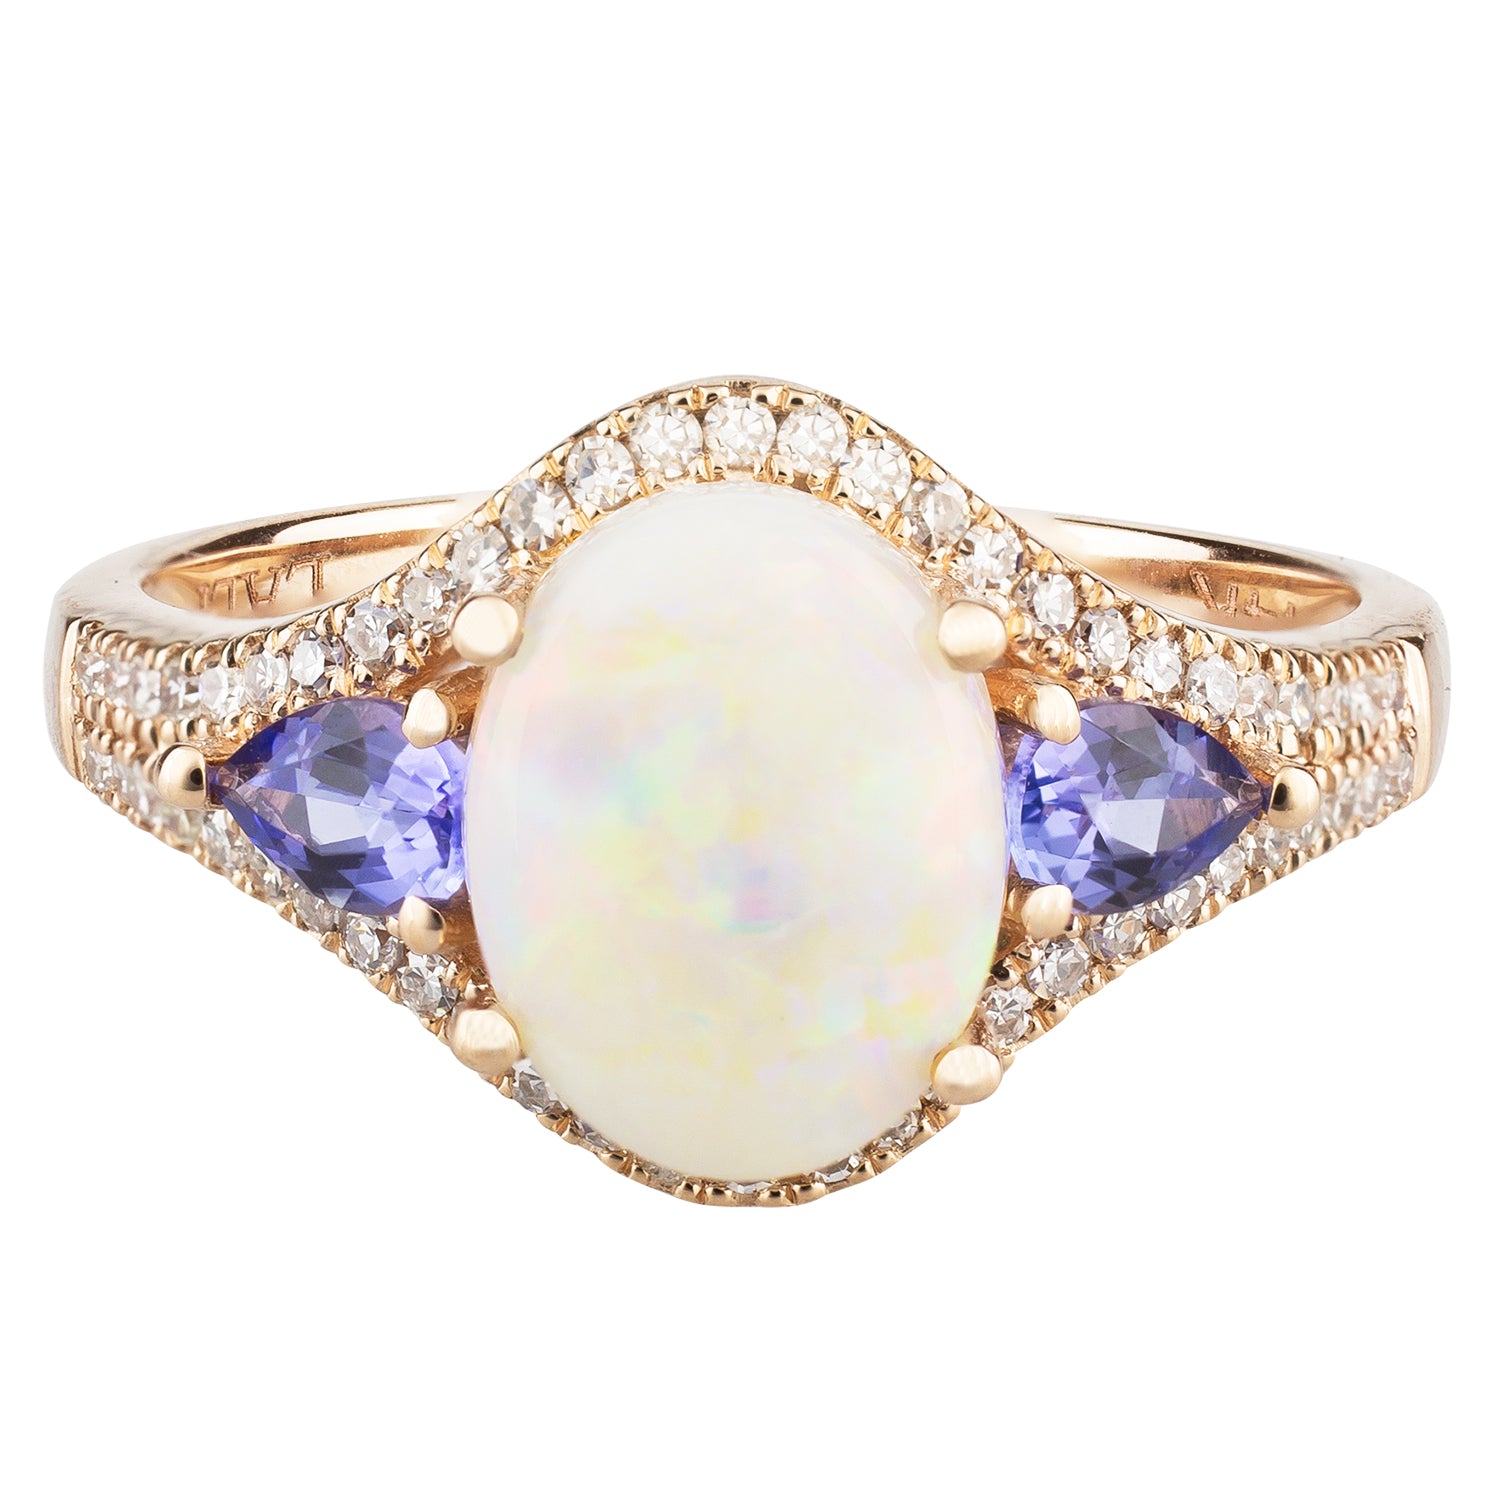 Diamond2Deal 14k Rose Gold 1.6ct Oval Cut Opal and Engagement Ring for Women